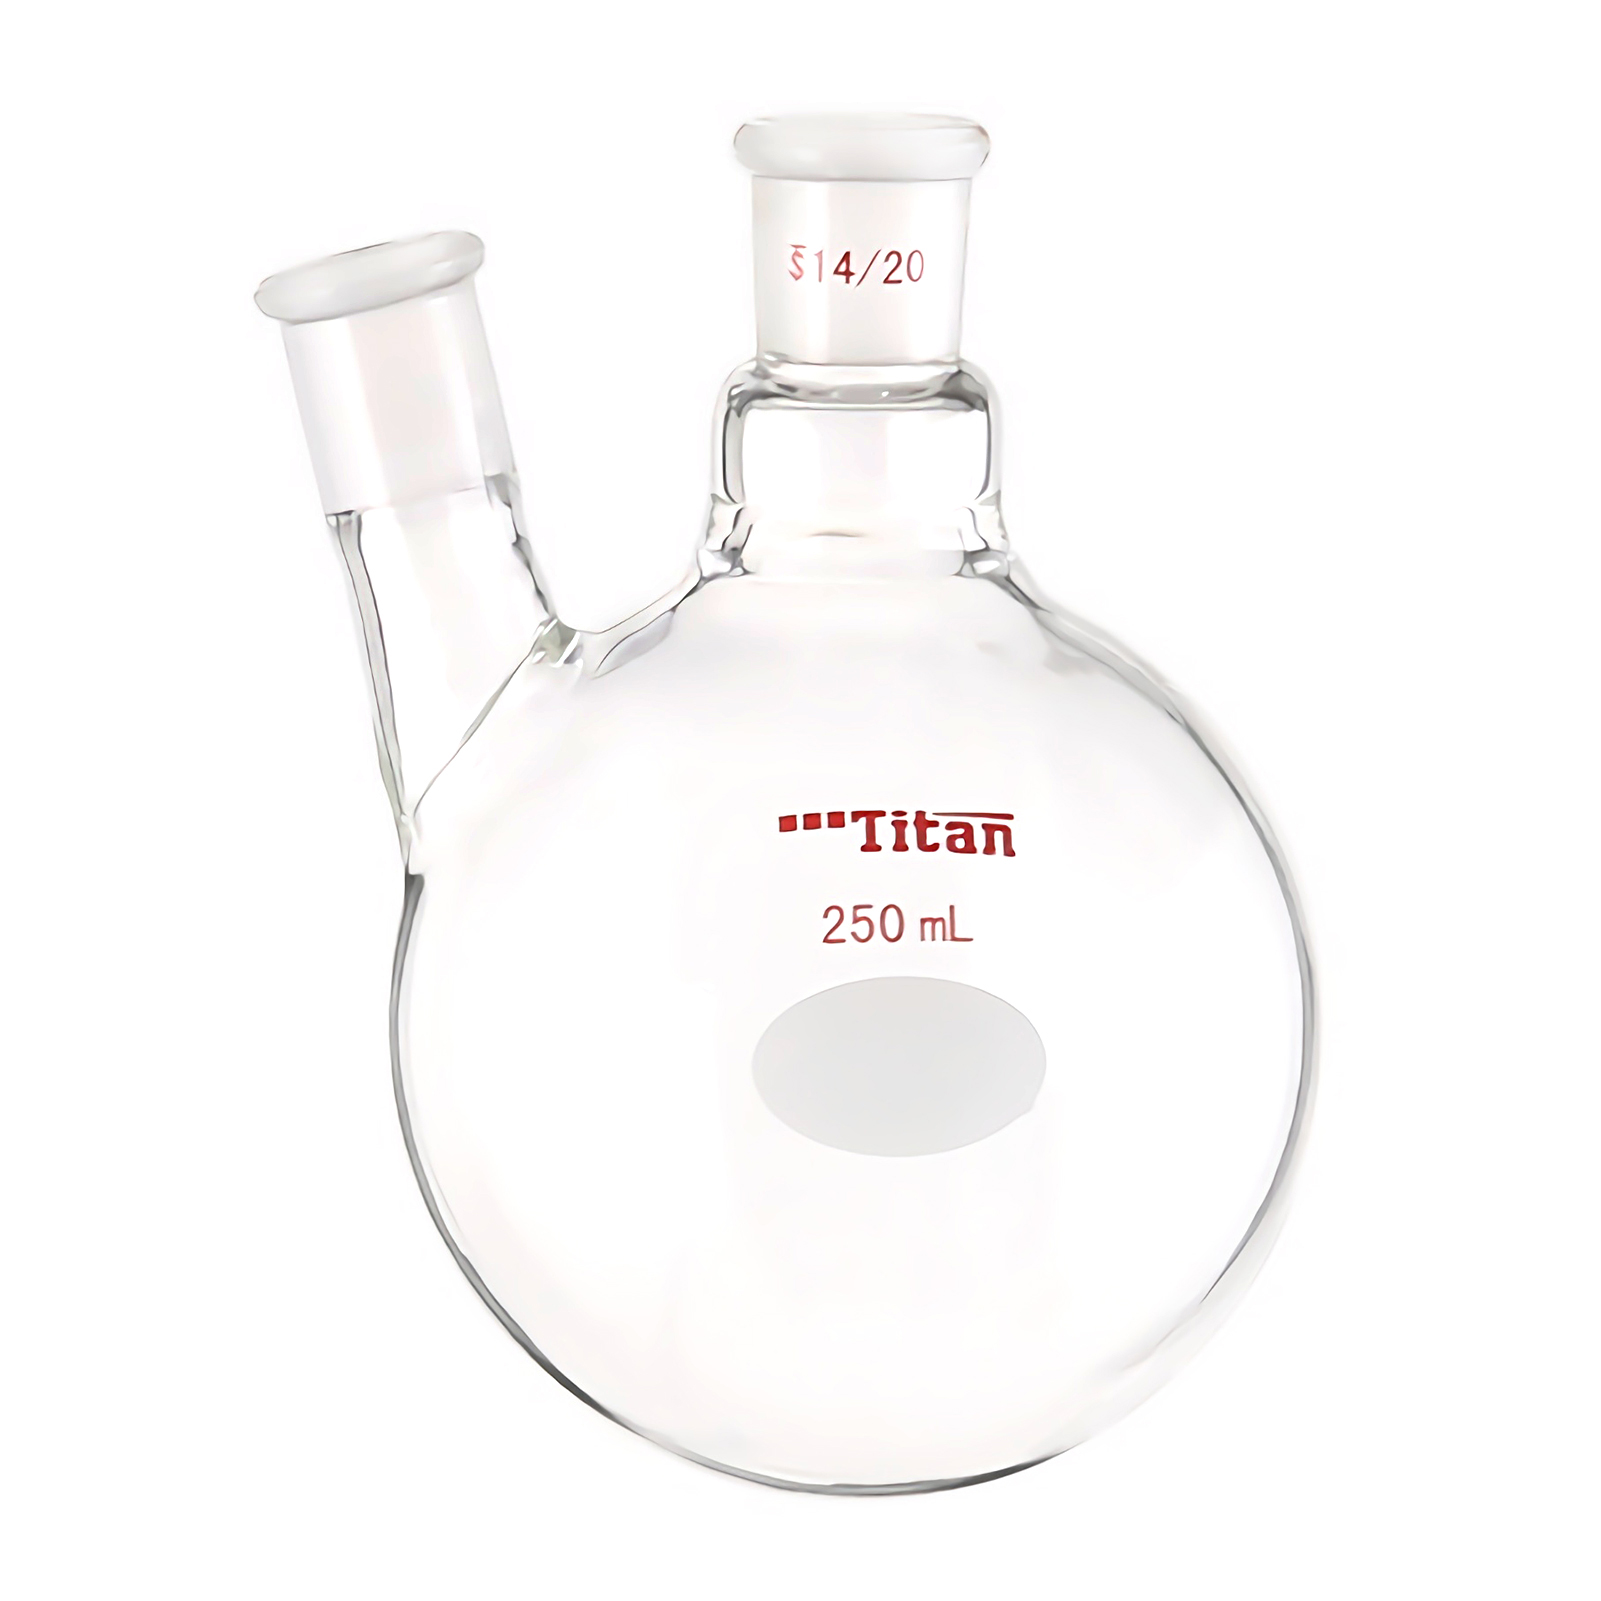 ADAMAS BETA Oblique Mouth Ball Bottle 25ml-1000ml Thick Walled Glass Flasks 2-Necked Grinded Lab Glassware for Distillation/Evaporation Experiment